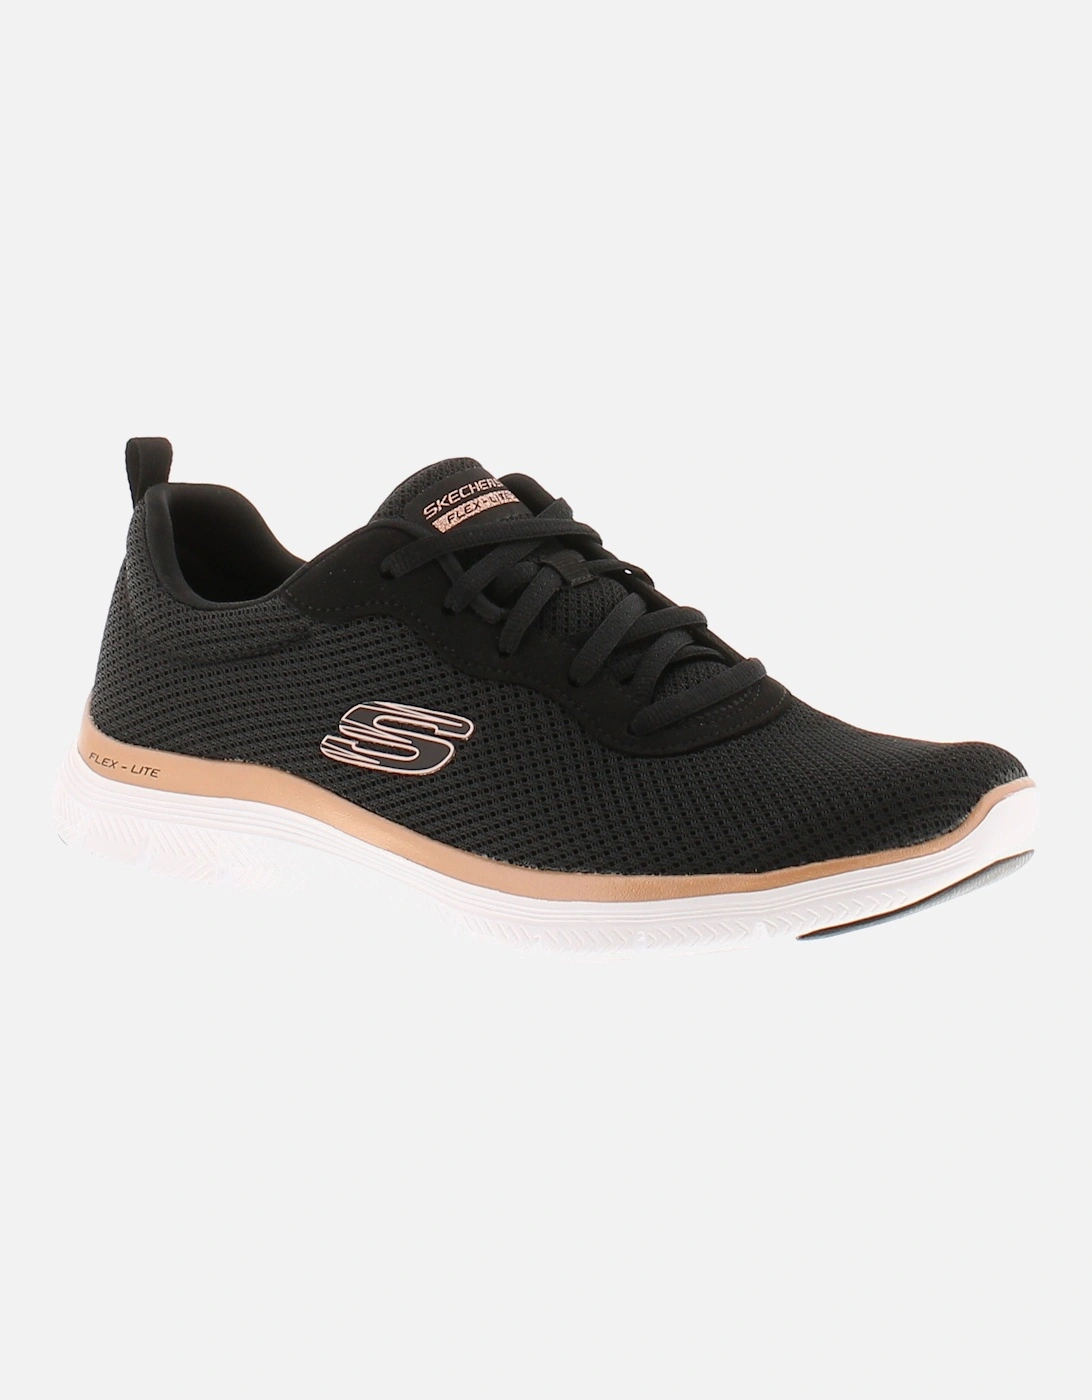 Womens Trainers Flex Appeal 4 0 Lace Up black rose gold UK Size, 6 of 5